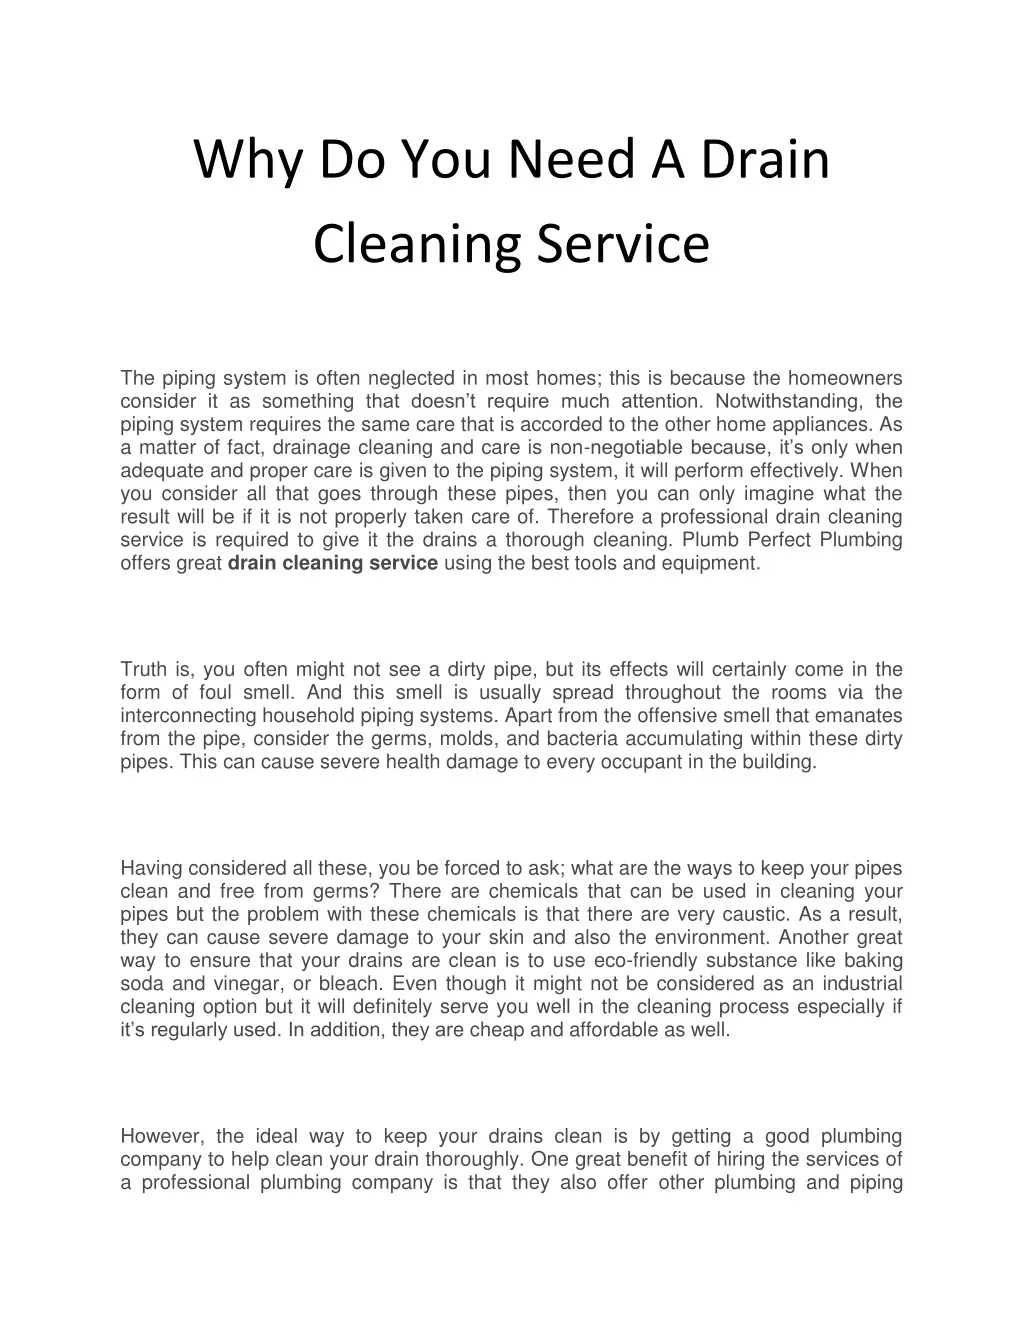 why do you need a drain cleaning service